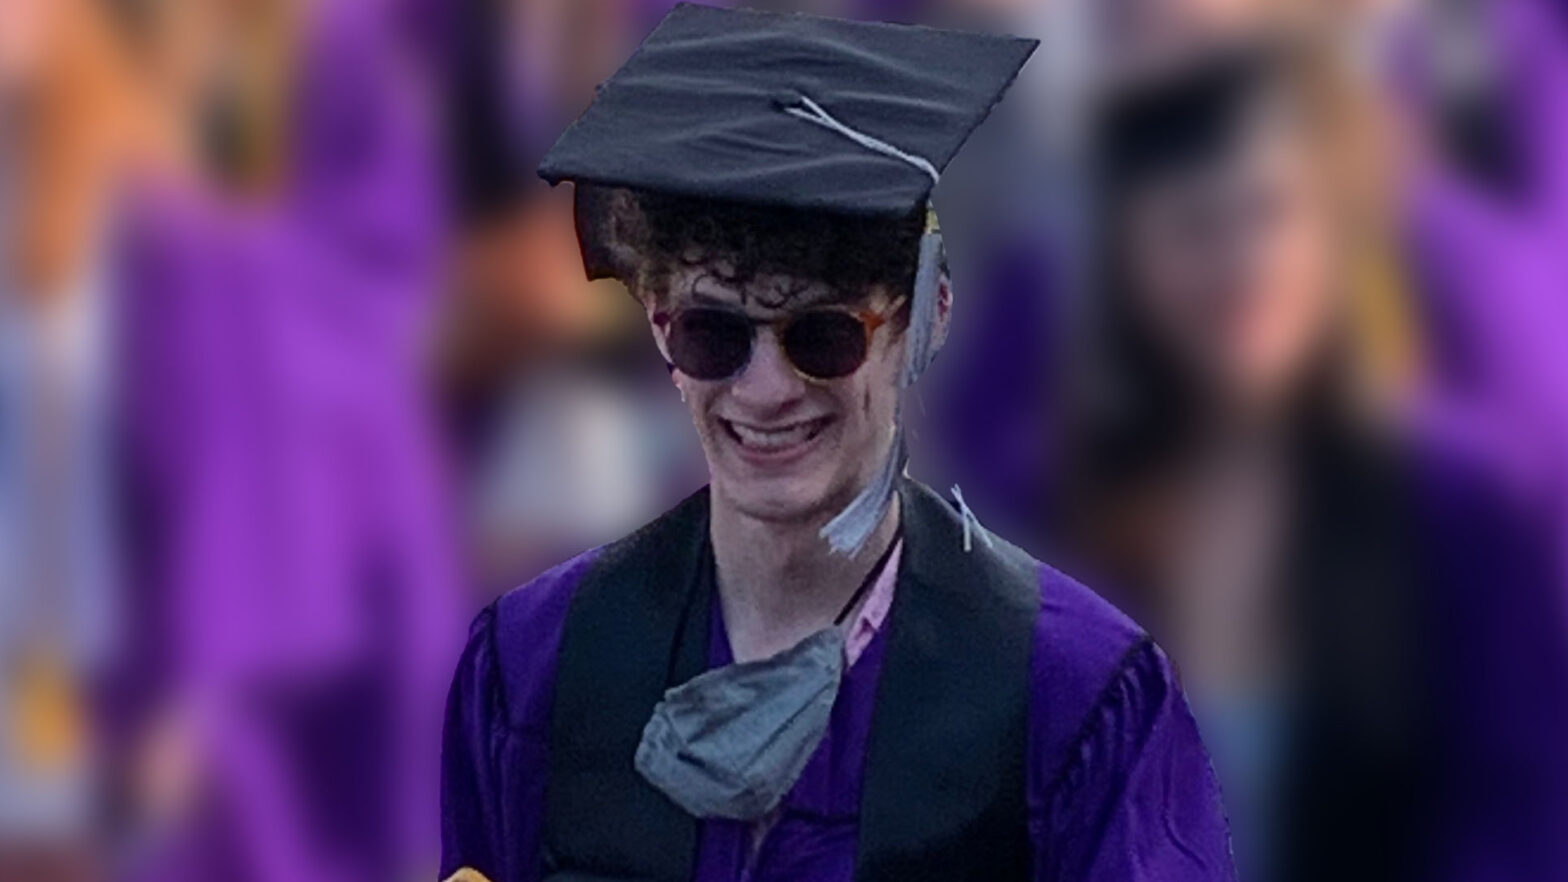 This image depicts Carter at his graduation from Northwestern. wearing a purple cap and gown and smiling at the camera while wearing sunglasses.